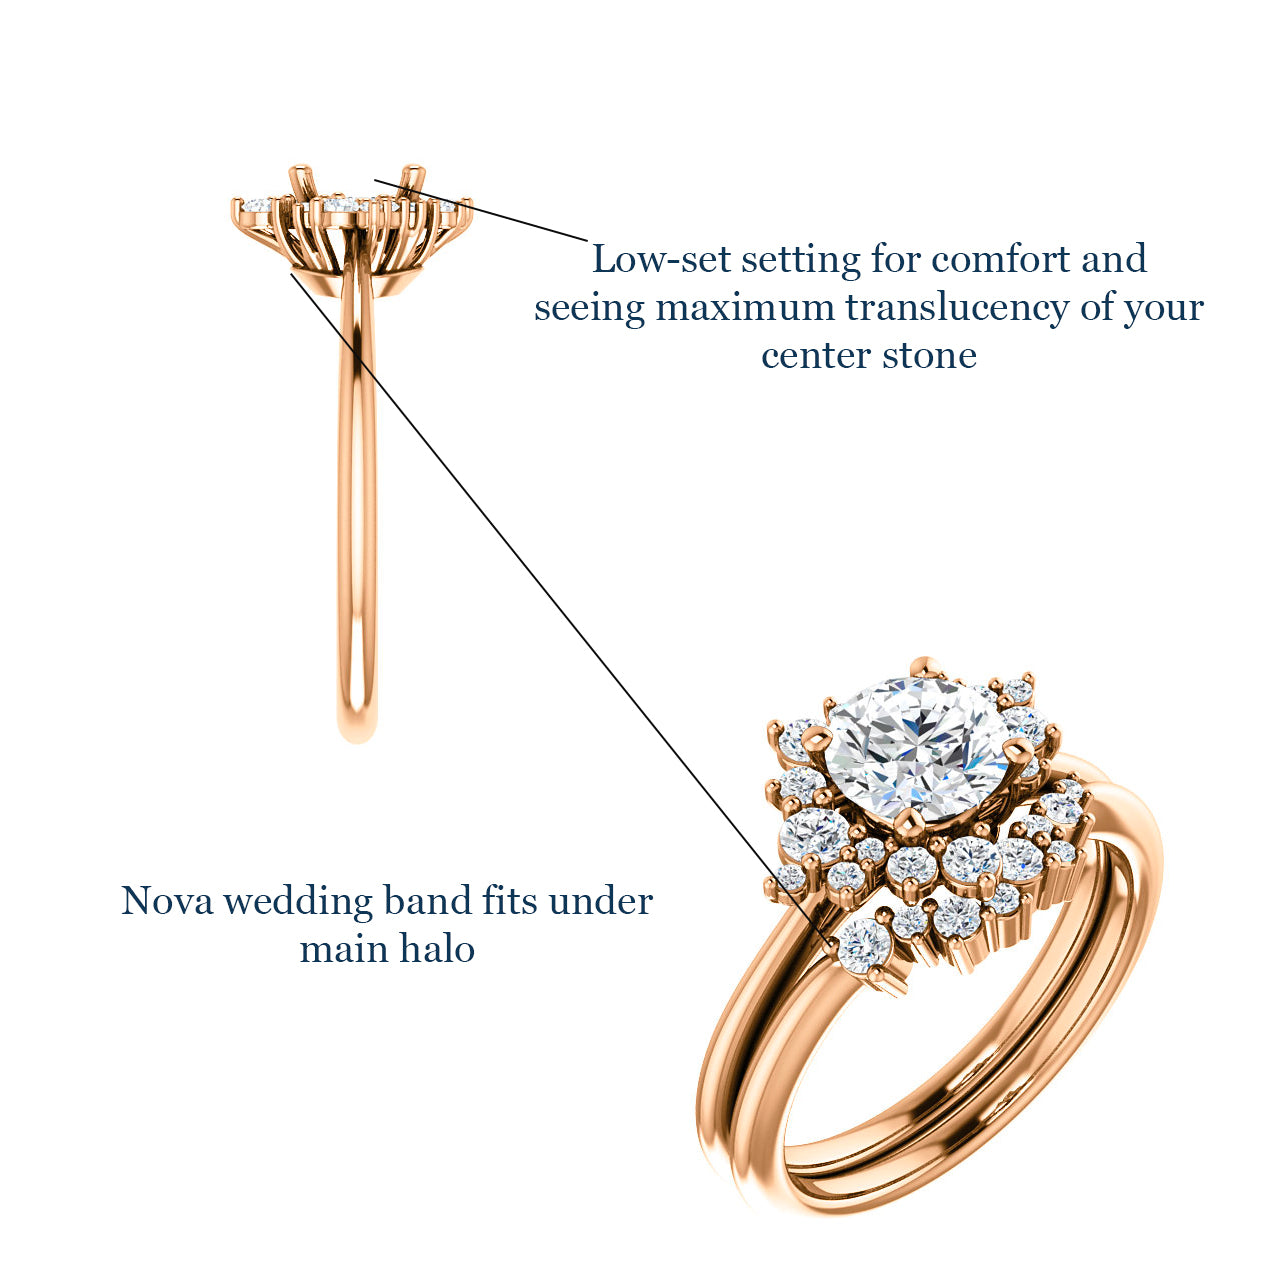 Orion setting - Midwinter Co. Alternative Bridal Rings and Modern Fine Jewelry